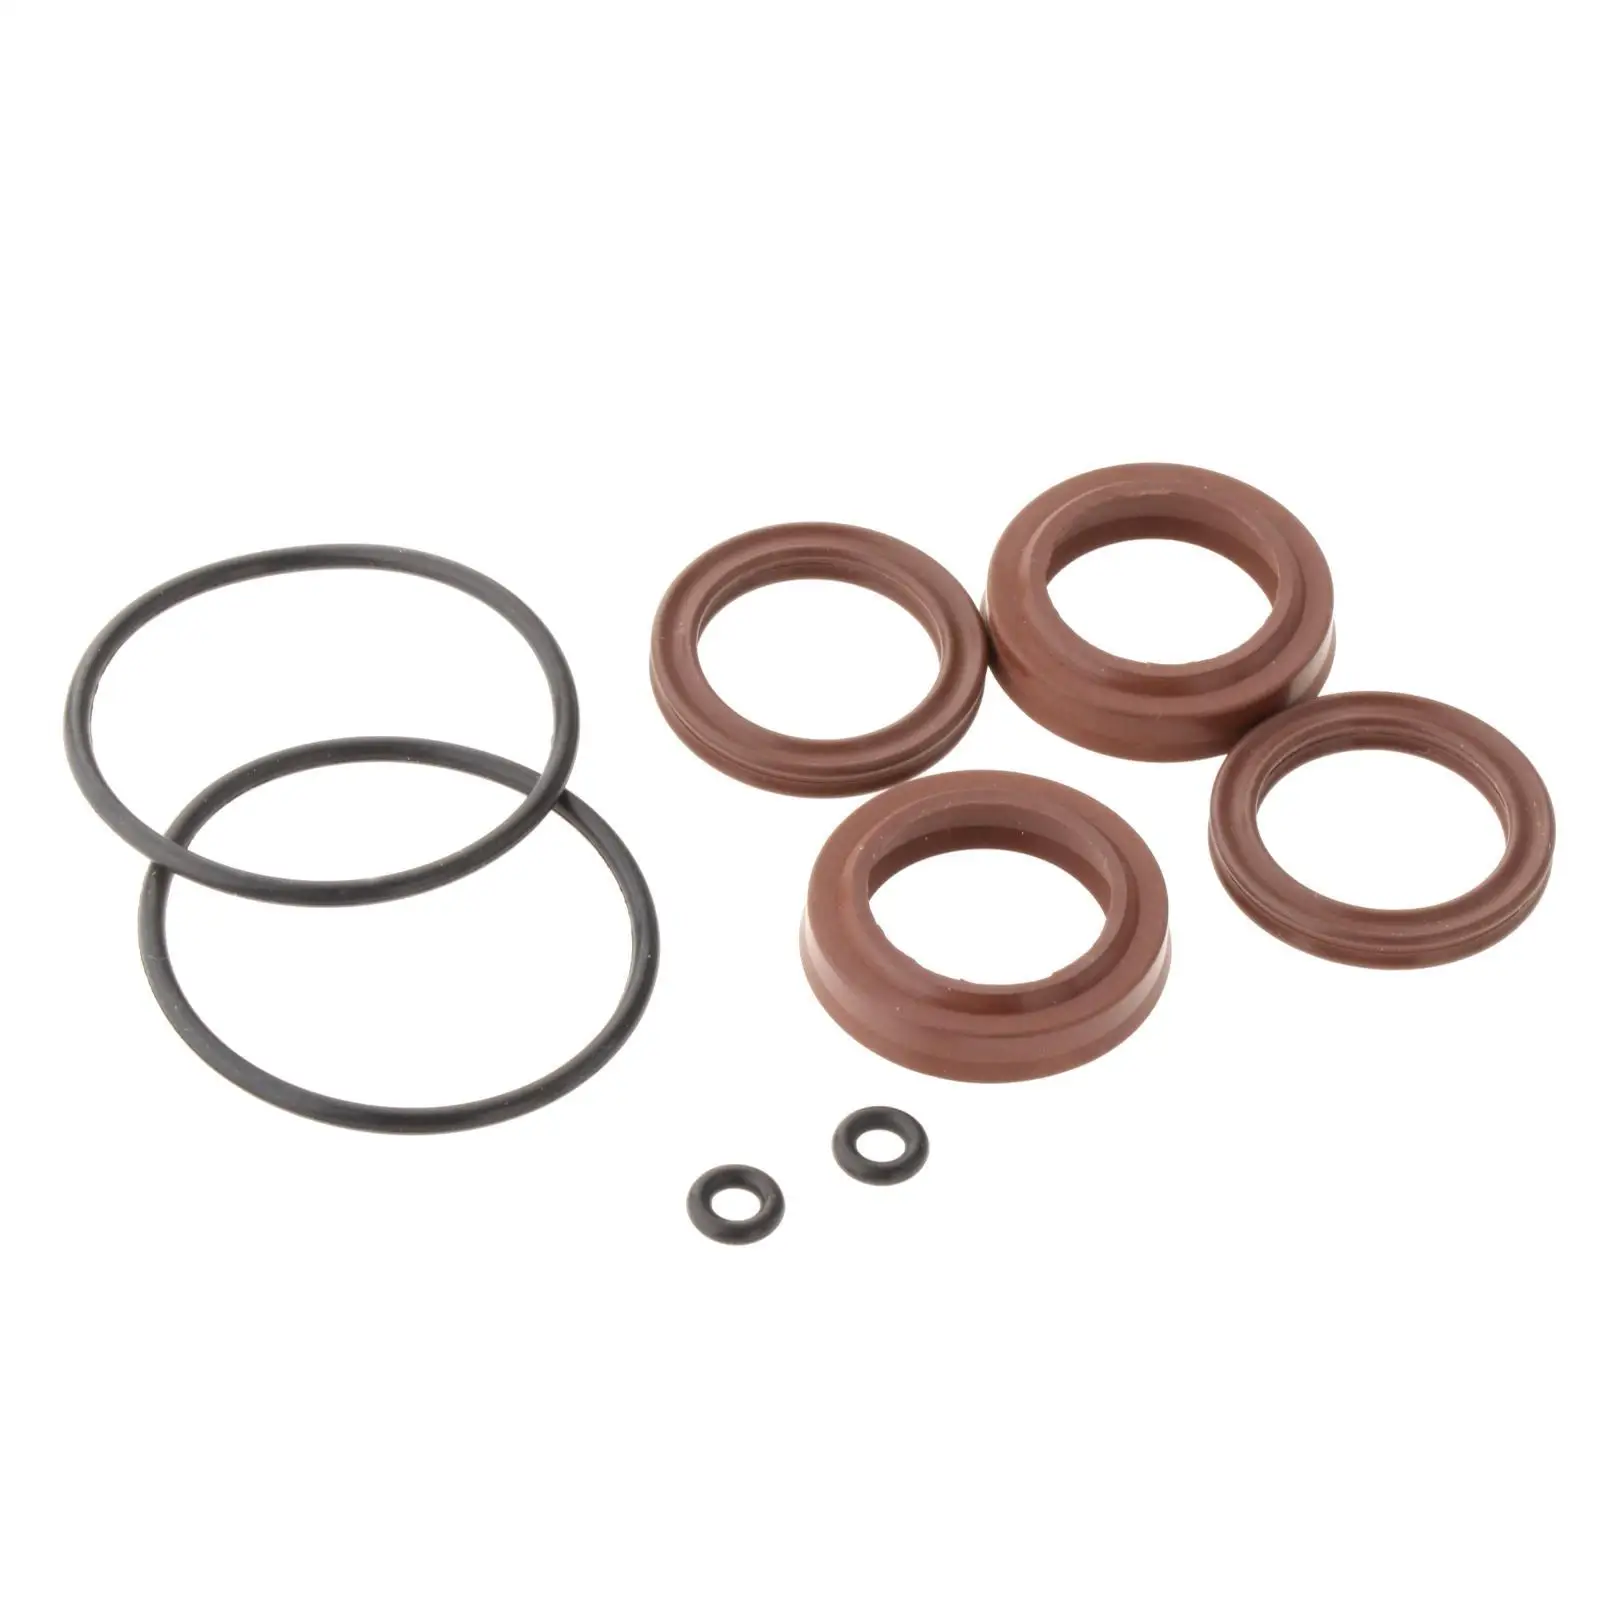 8Pcs Steering Cylinder Fit for Seastar Teleflex Rings HC5345 Fsm051 Replacement Kit Front Mount